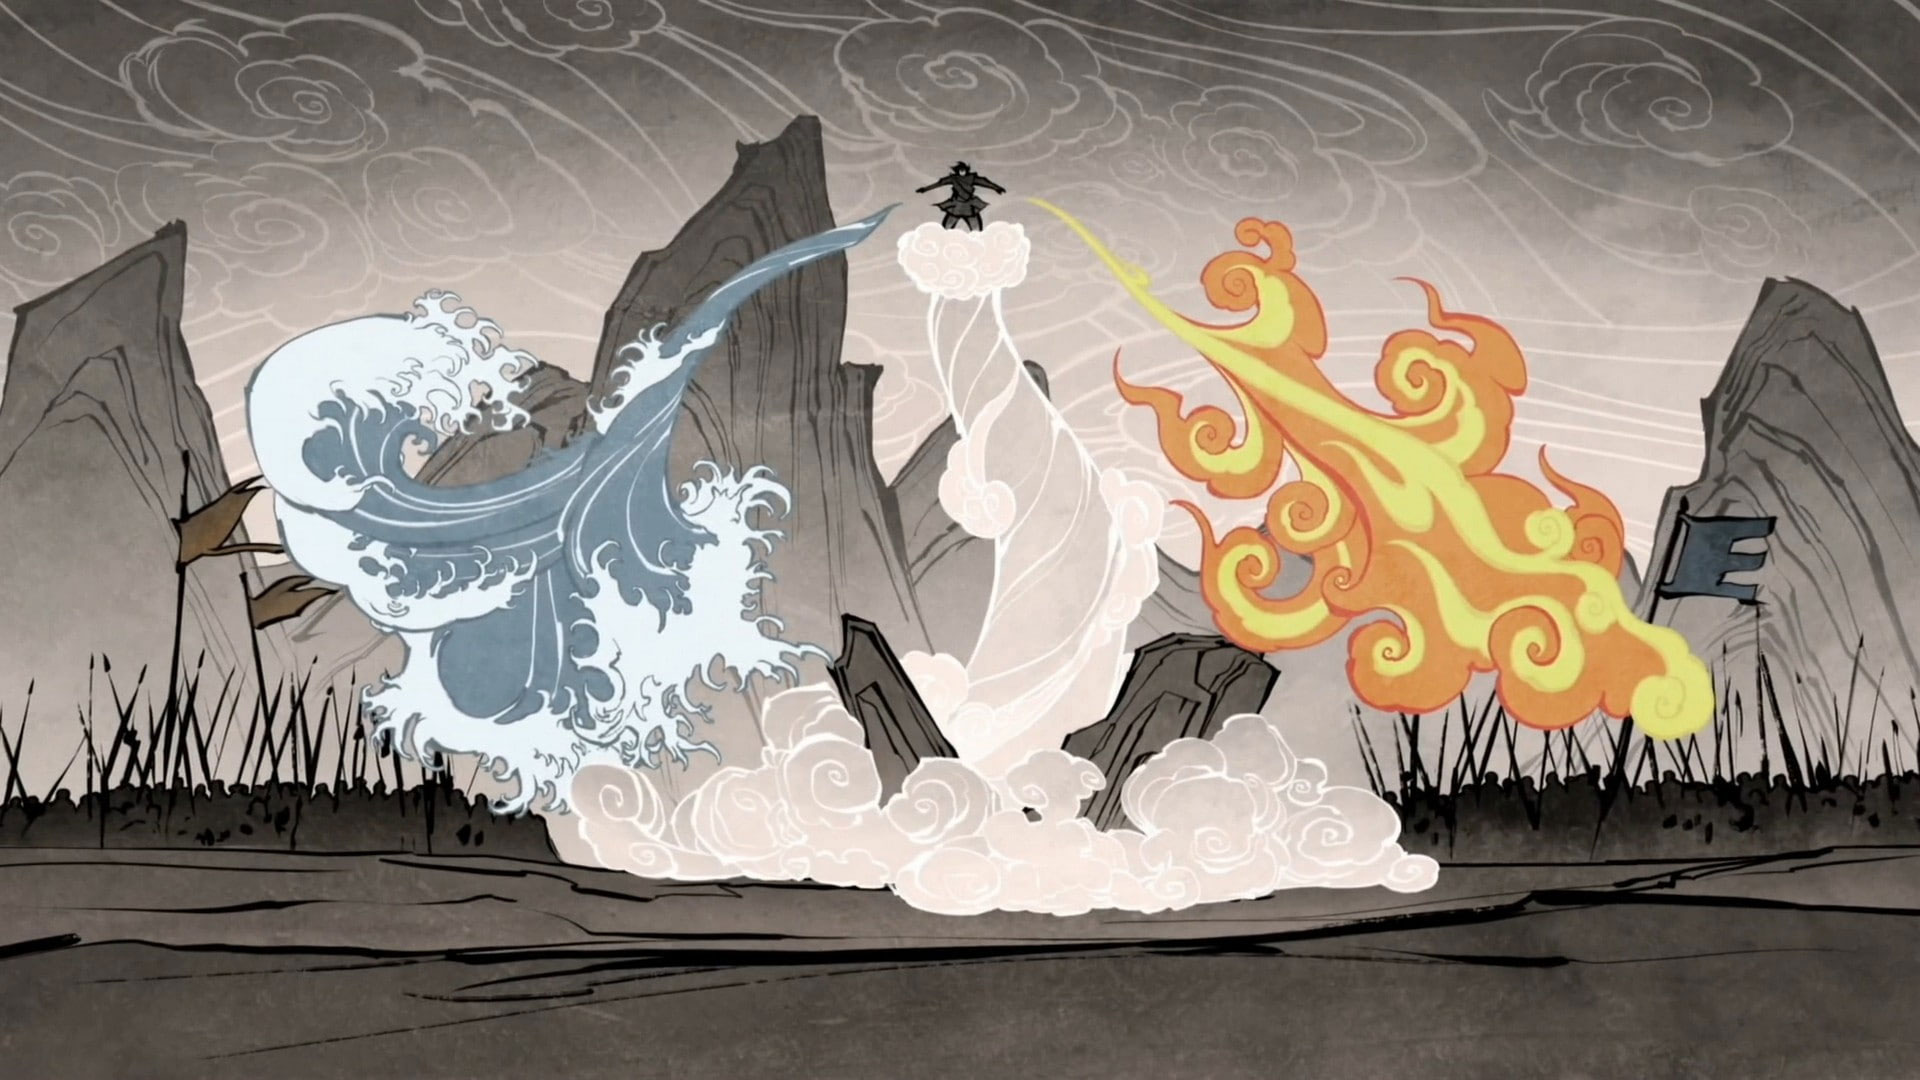 korra avatar the last airbender 1080P 2k 4k HD wallpapers backgrounds  free download  Rare Gallery